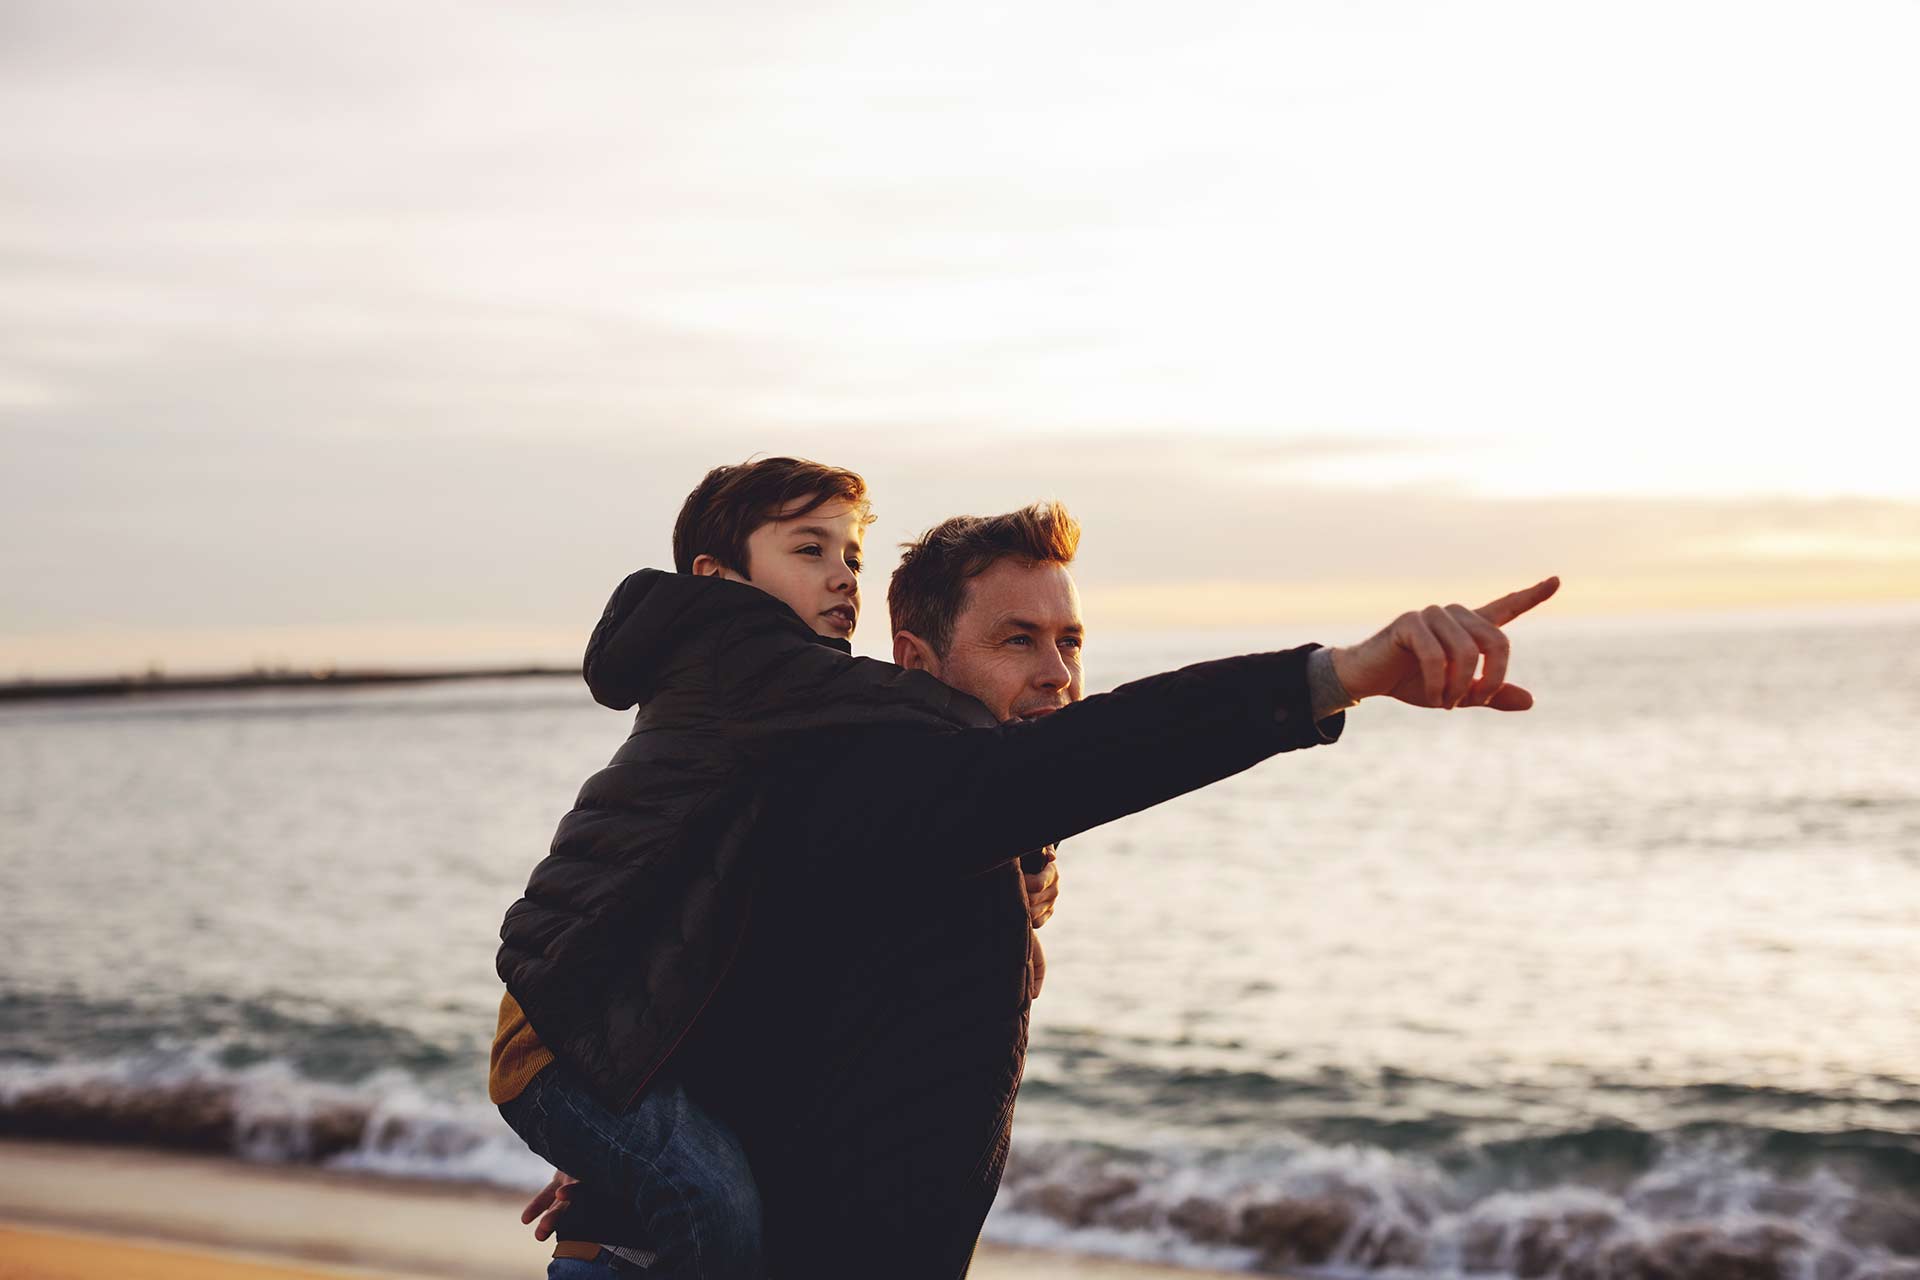 , image shows a father carrying a child on his back at a beach, pointing into the distance